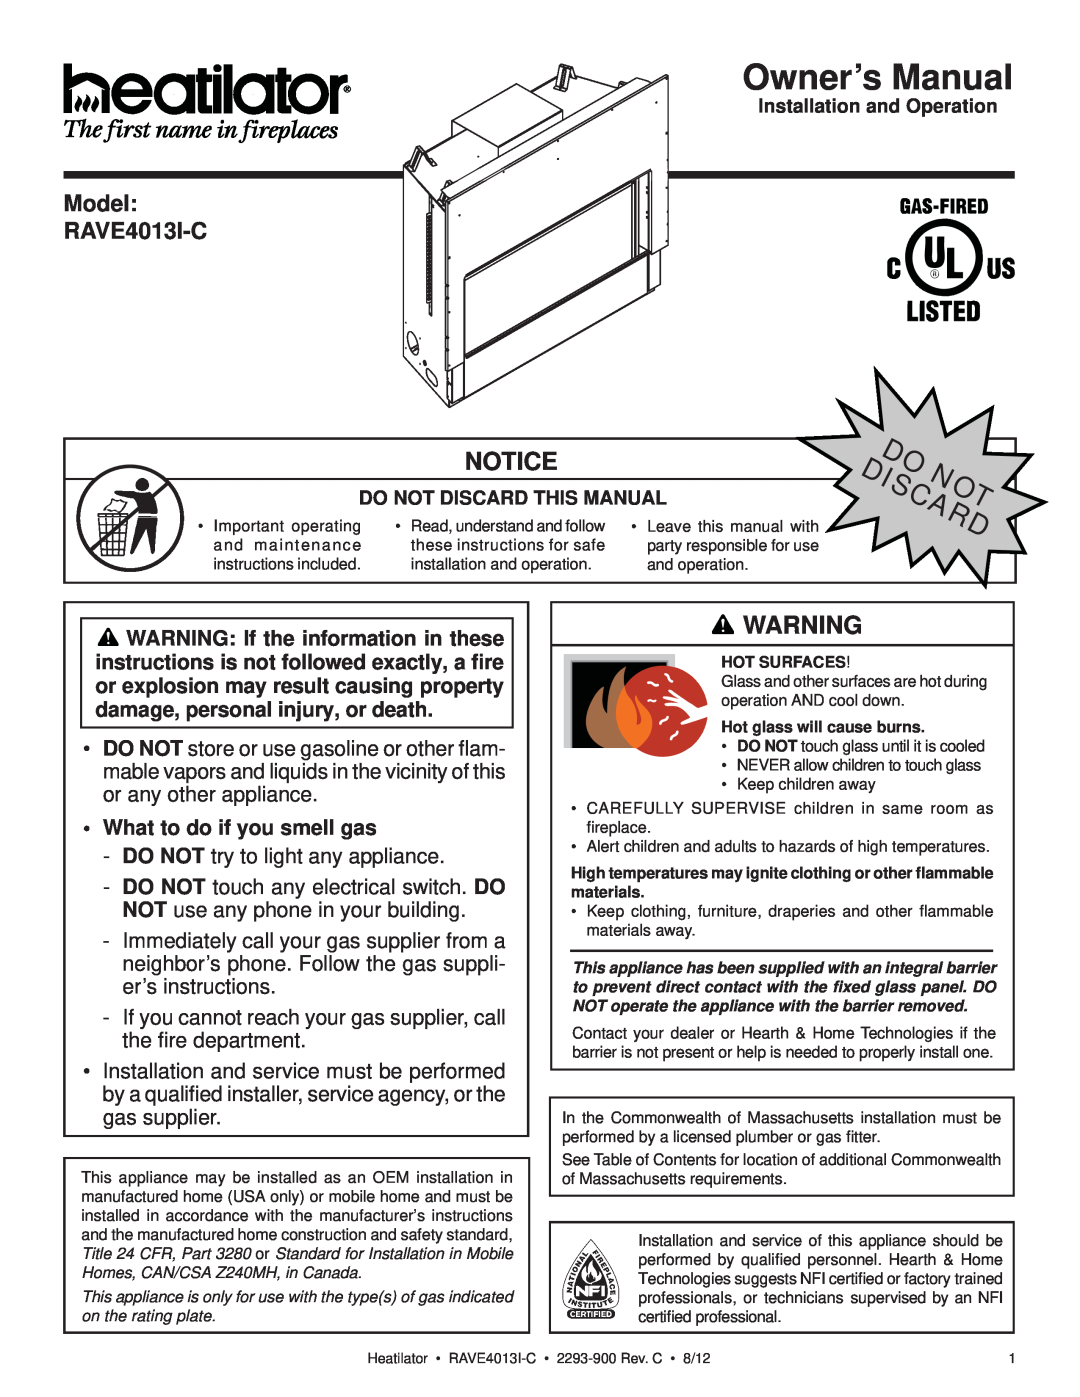 Heatiator Rave4013i-c owner manual Notice, Model RAVE4013I-C, What to do if you smell gas 